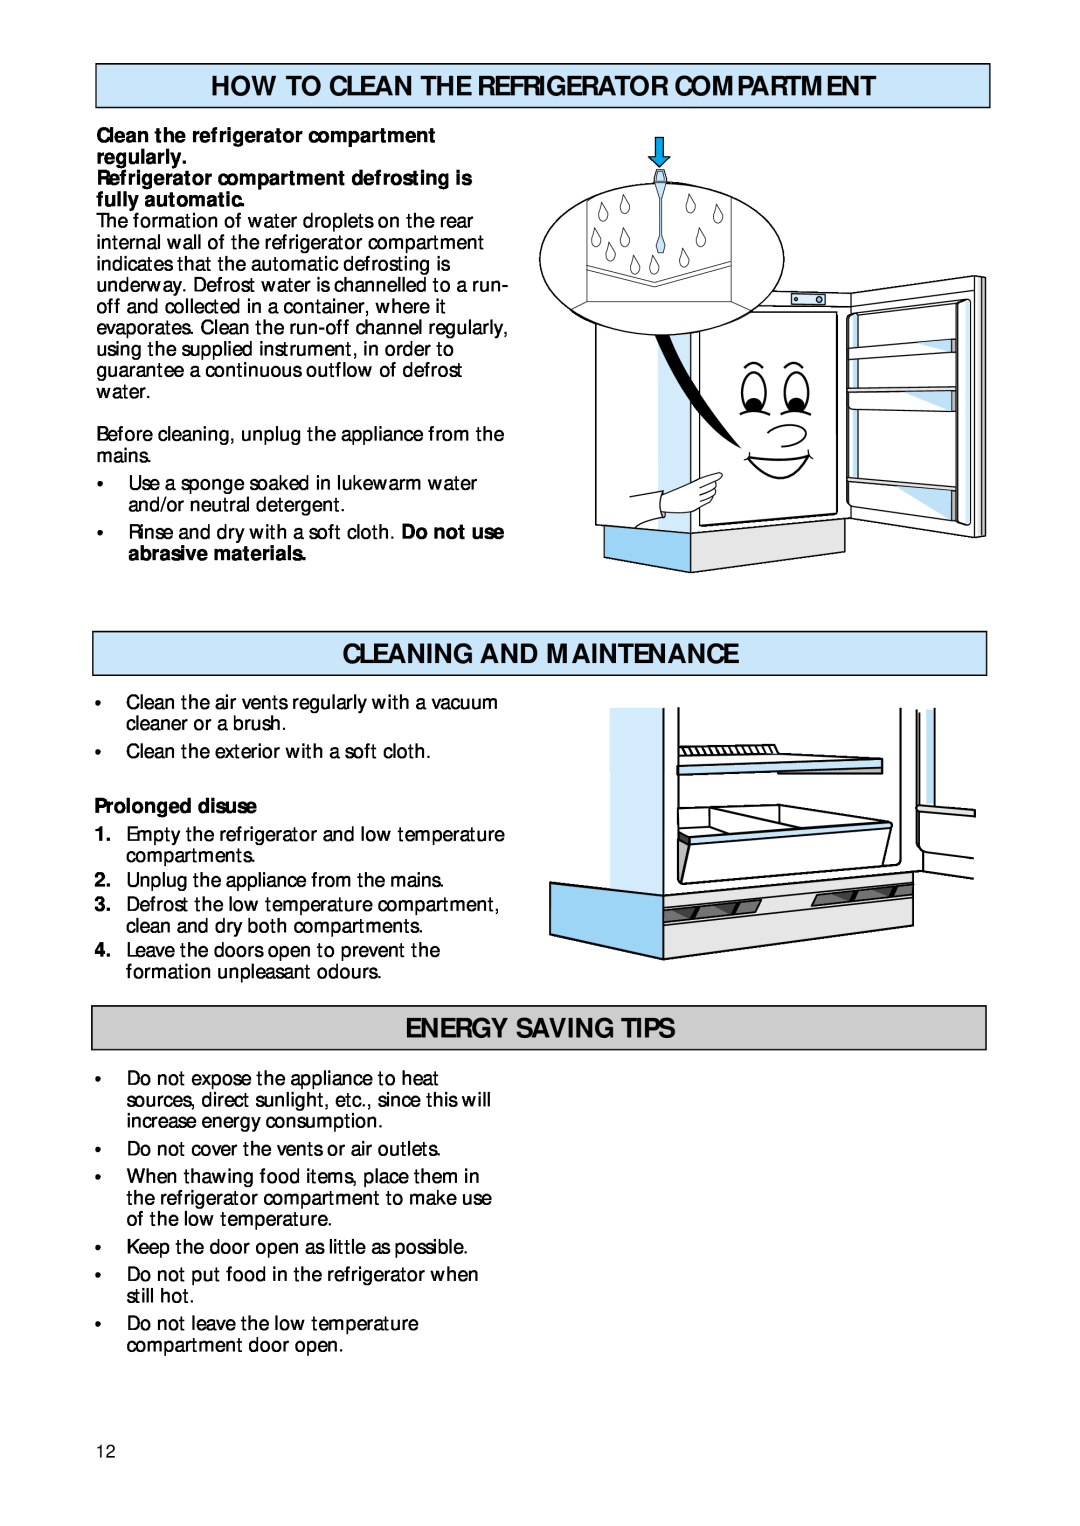 Smeg FR148A manual How To Clean The Refrigerator Compartment, Cleaning And Maintenance, Energy Saving Tips 